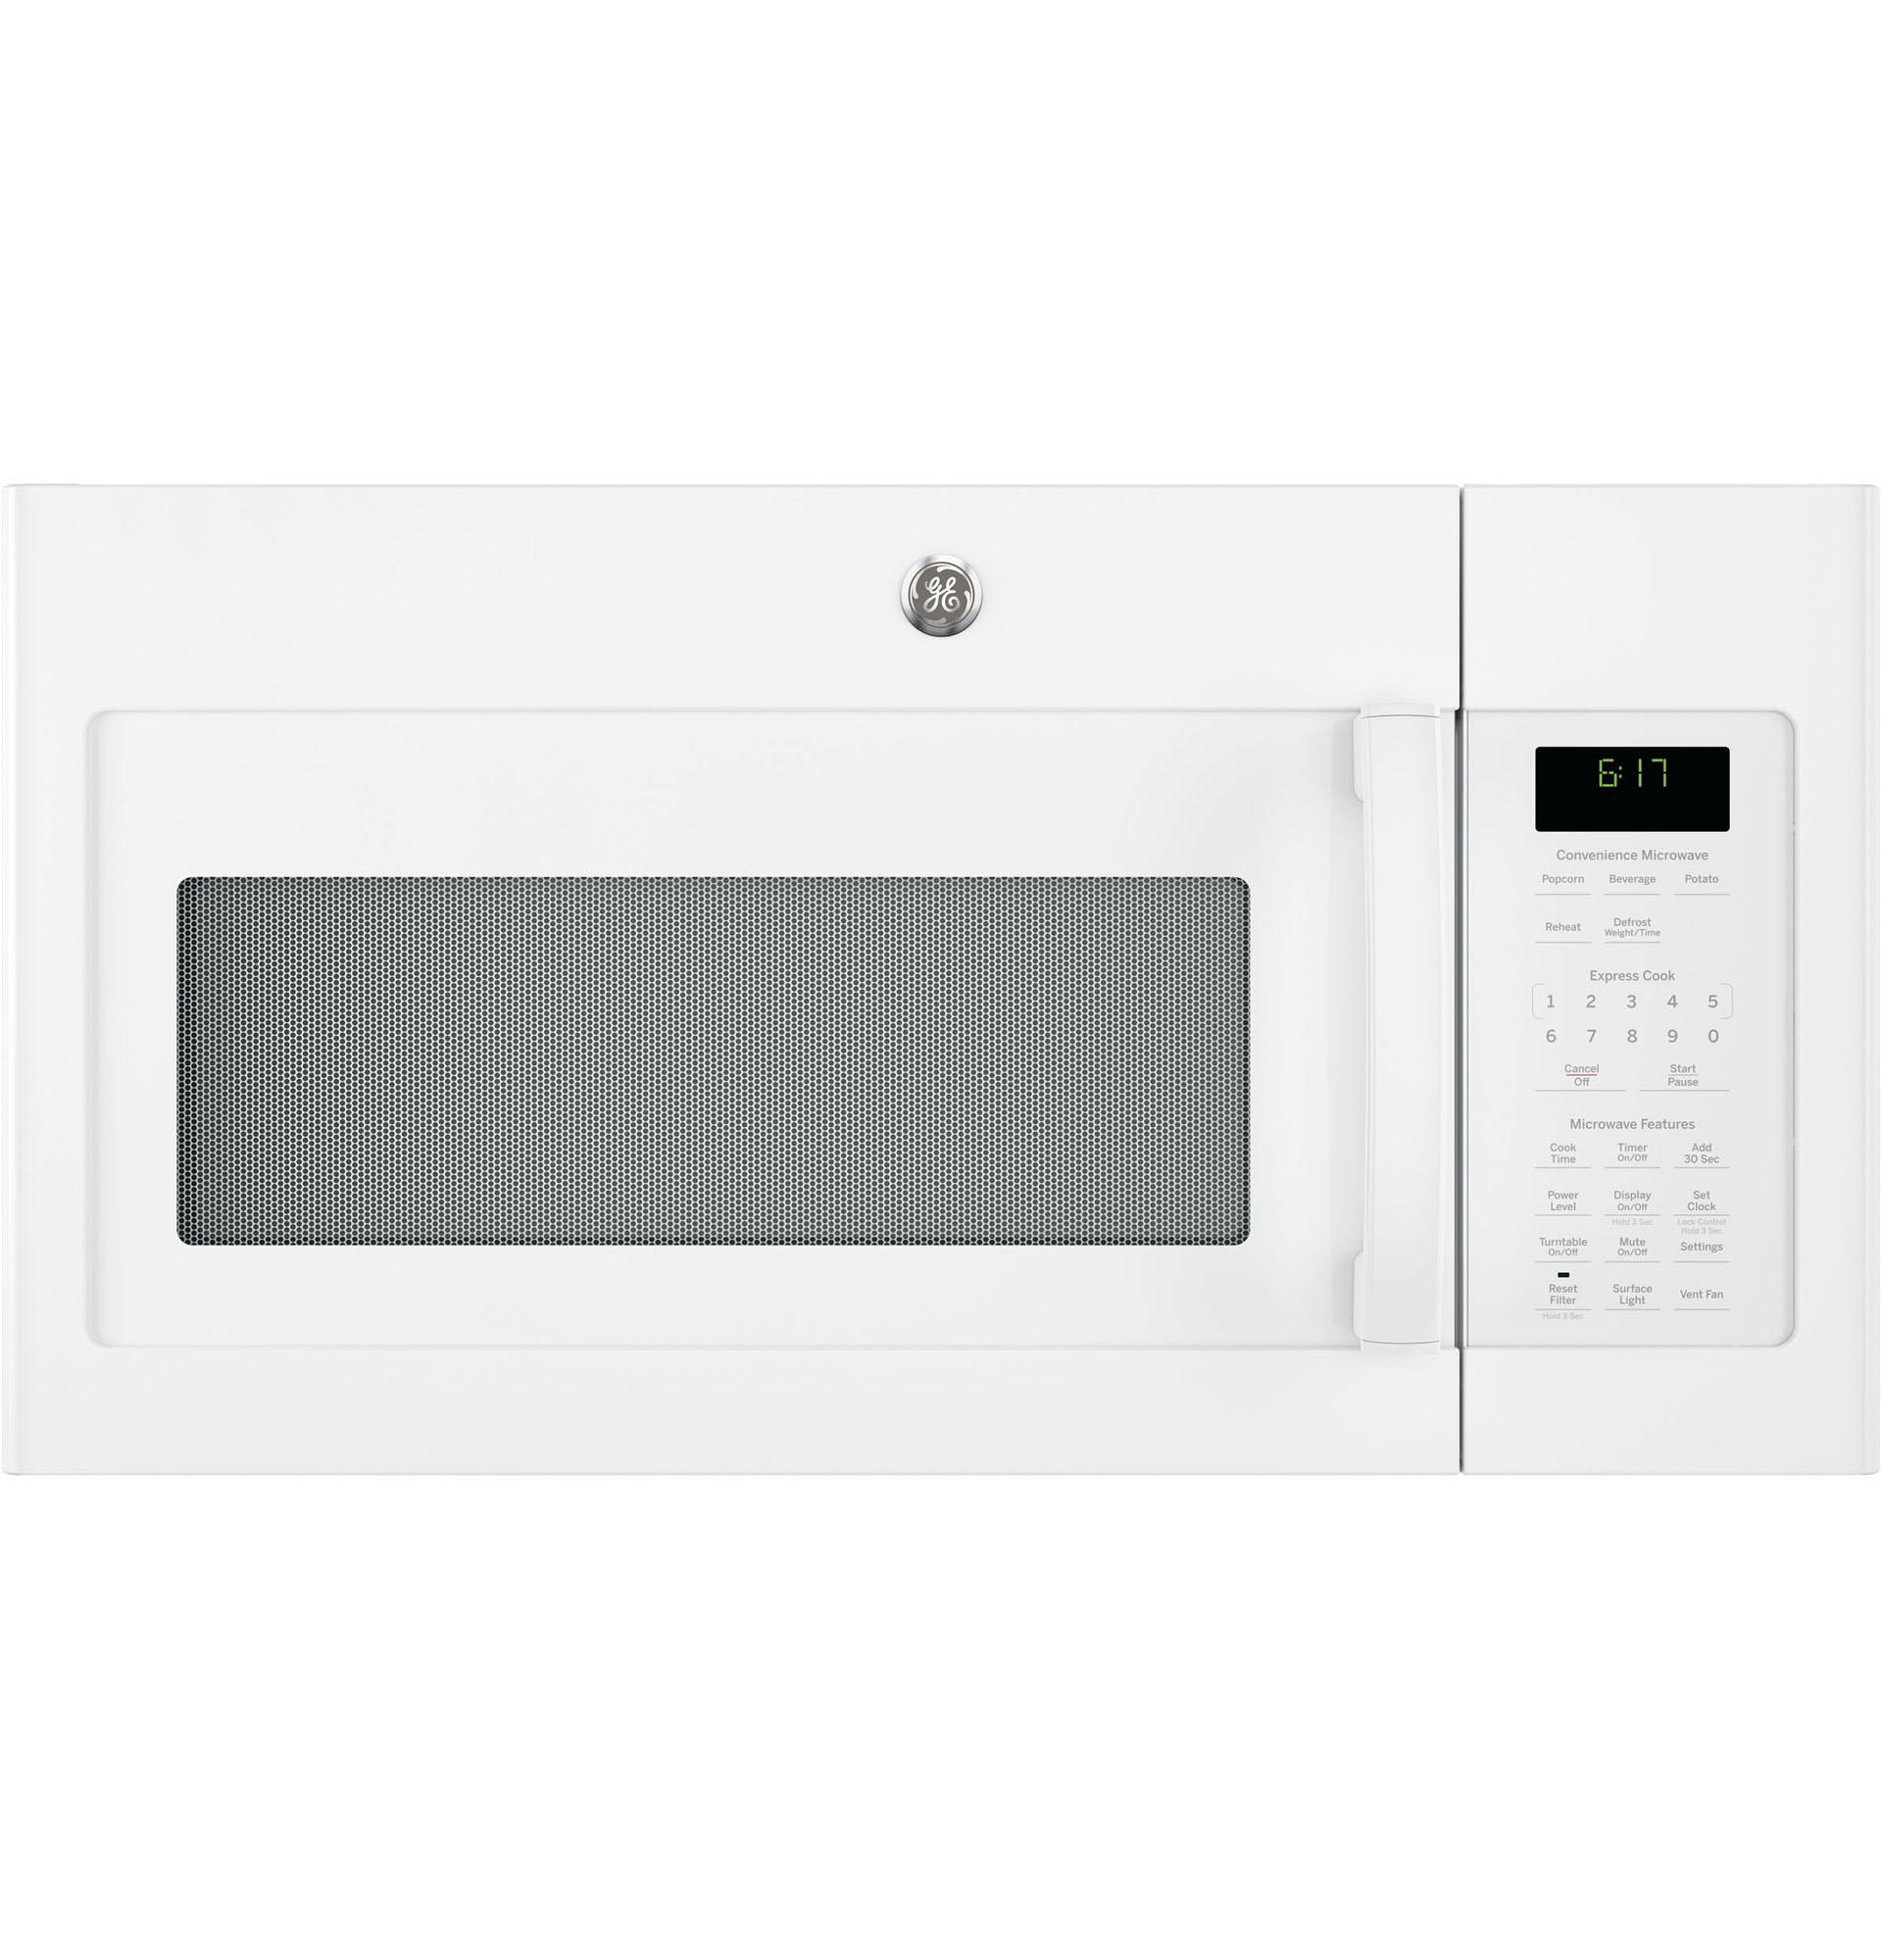 GE Appliances JVM6172DKWW 1.7 cu. ft. Over-the-Range Microwave Oven - White